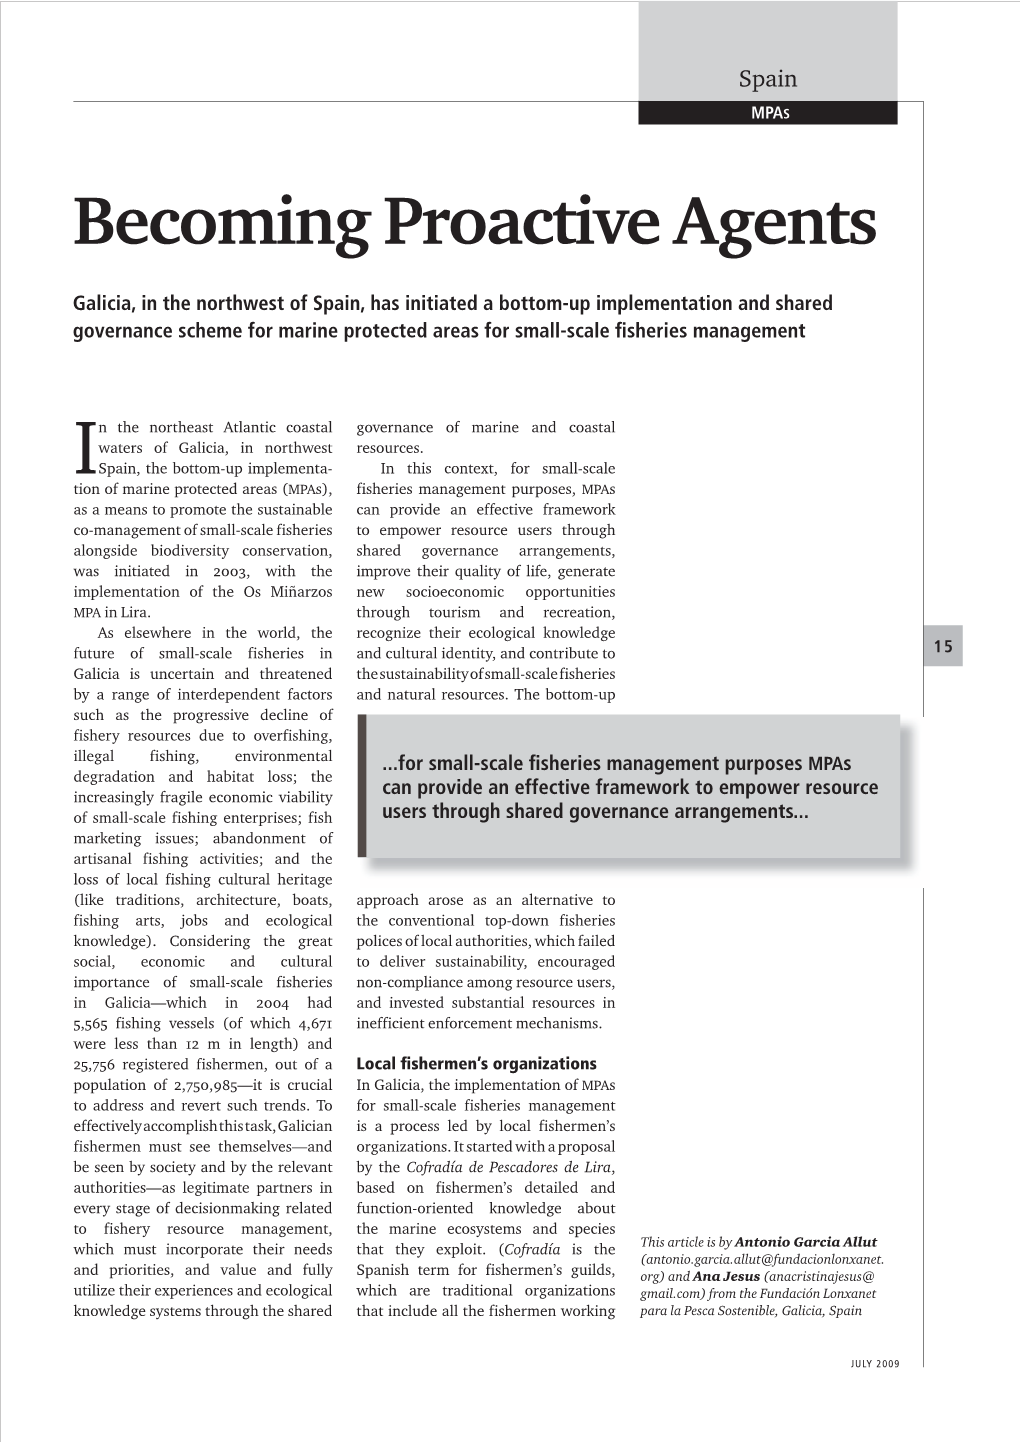 Becoming Proactive Agents